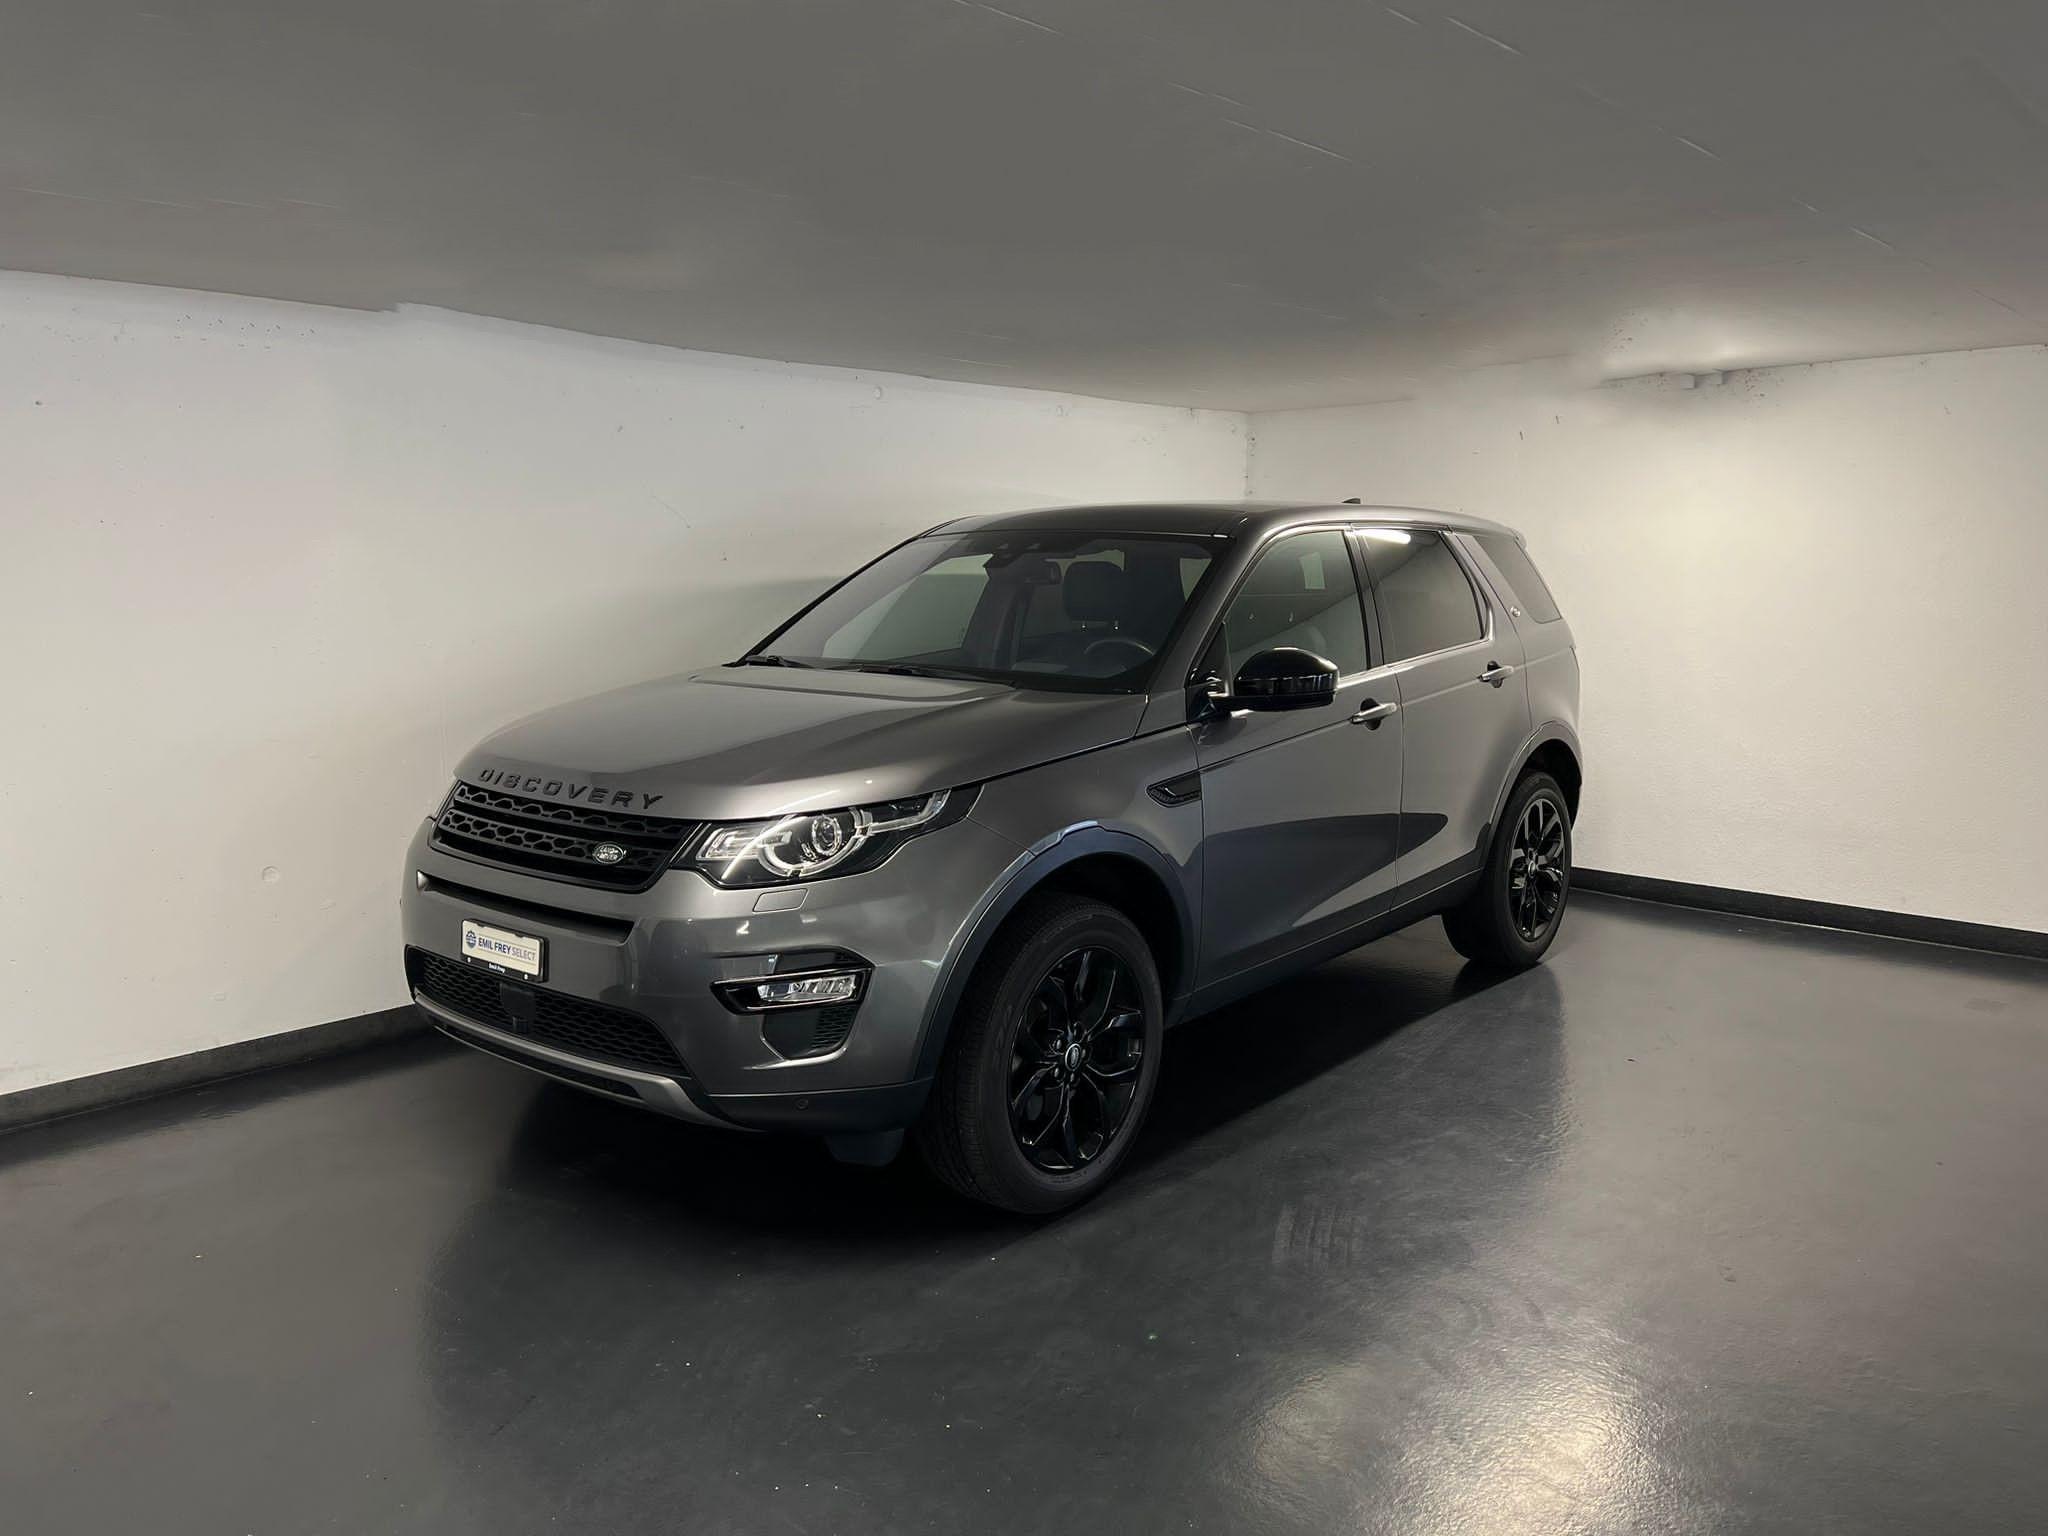 Land Rover Discovery Sport 2.0 Si4 HSE Occasioni CHF 36'900.–